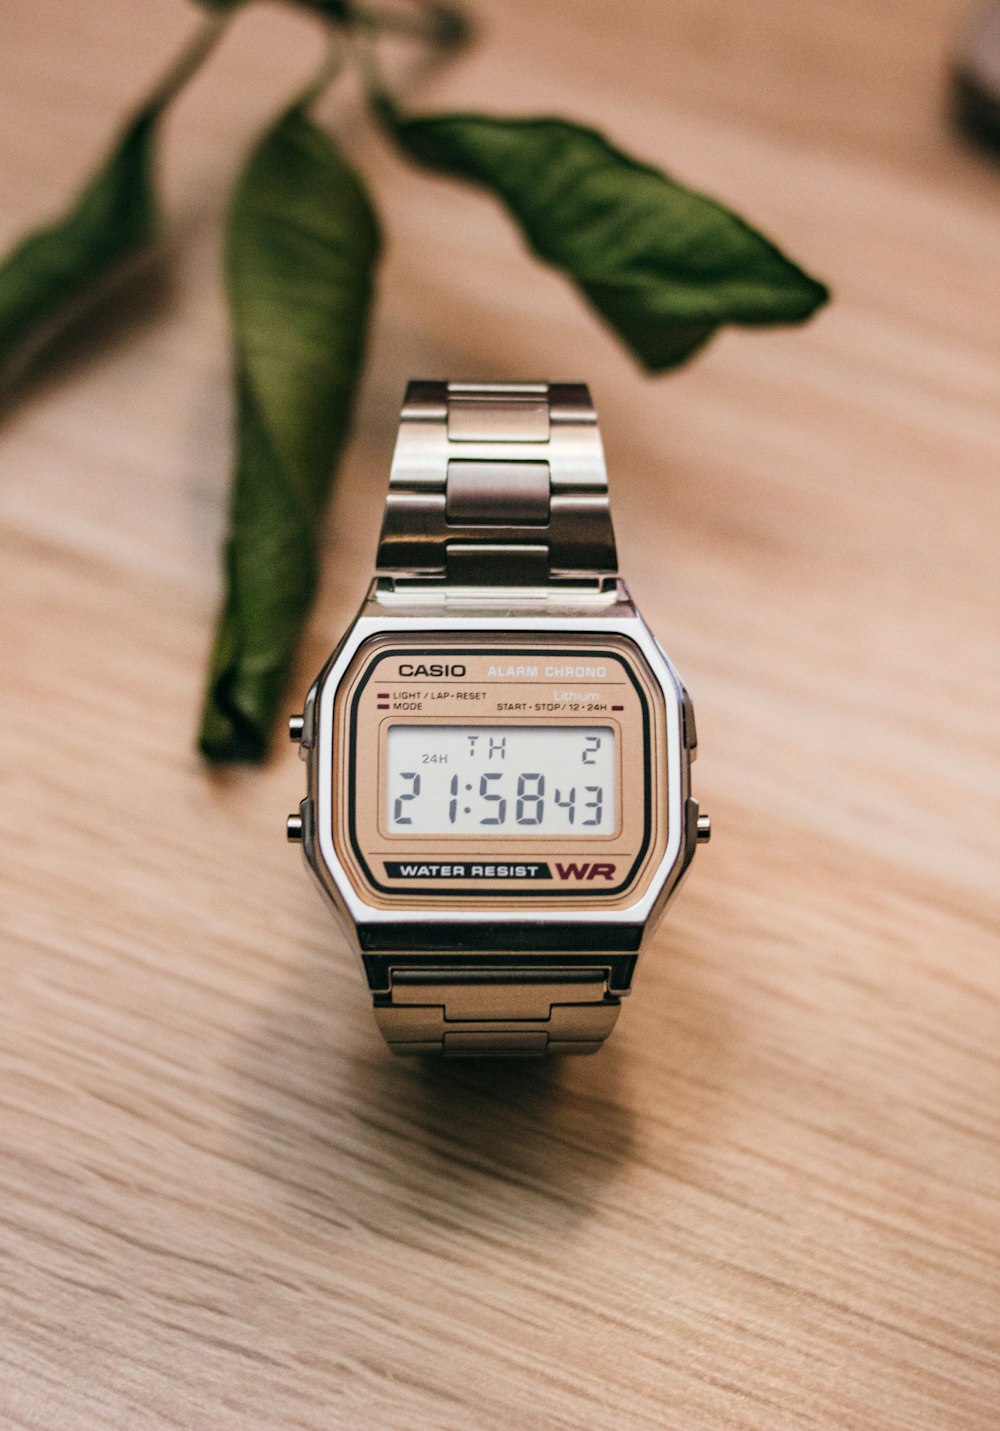 brown and silver Casio digital watch on wooden surface